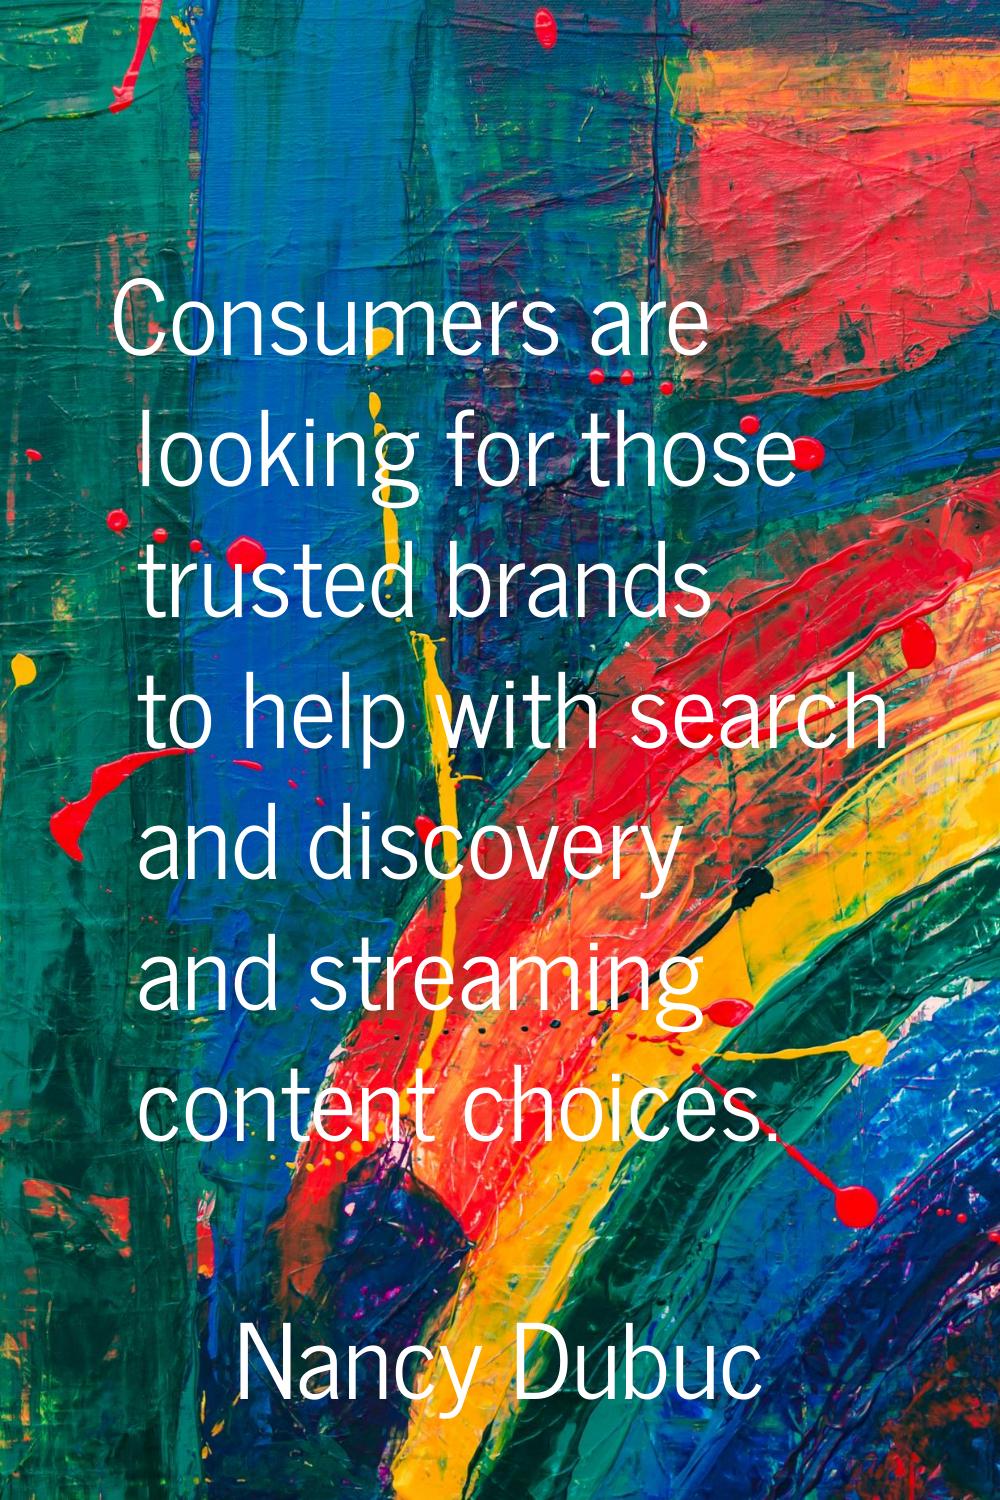 Consumers are looking for those trusted brands to help with search and discovery and streaming cont